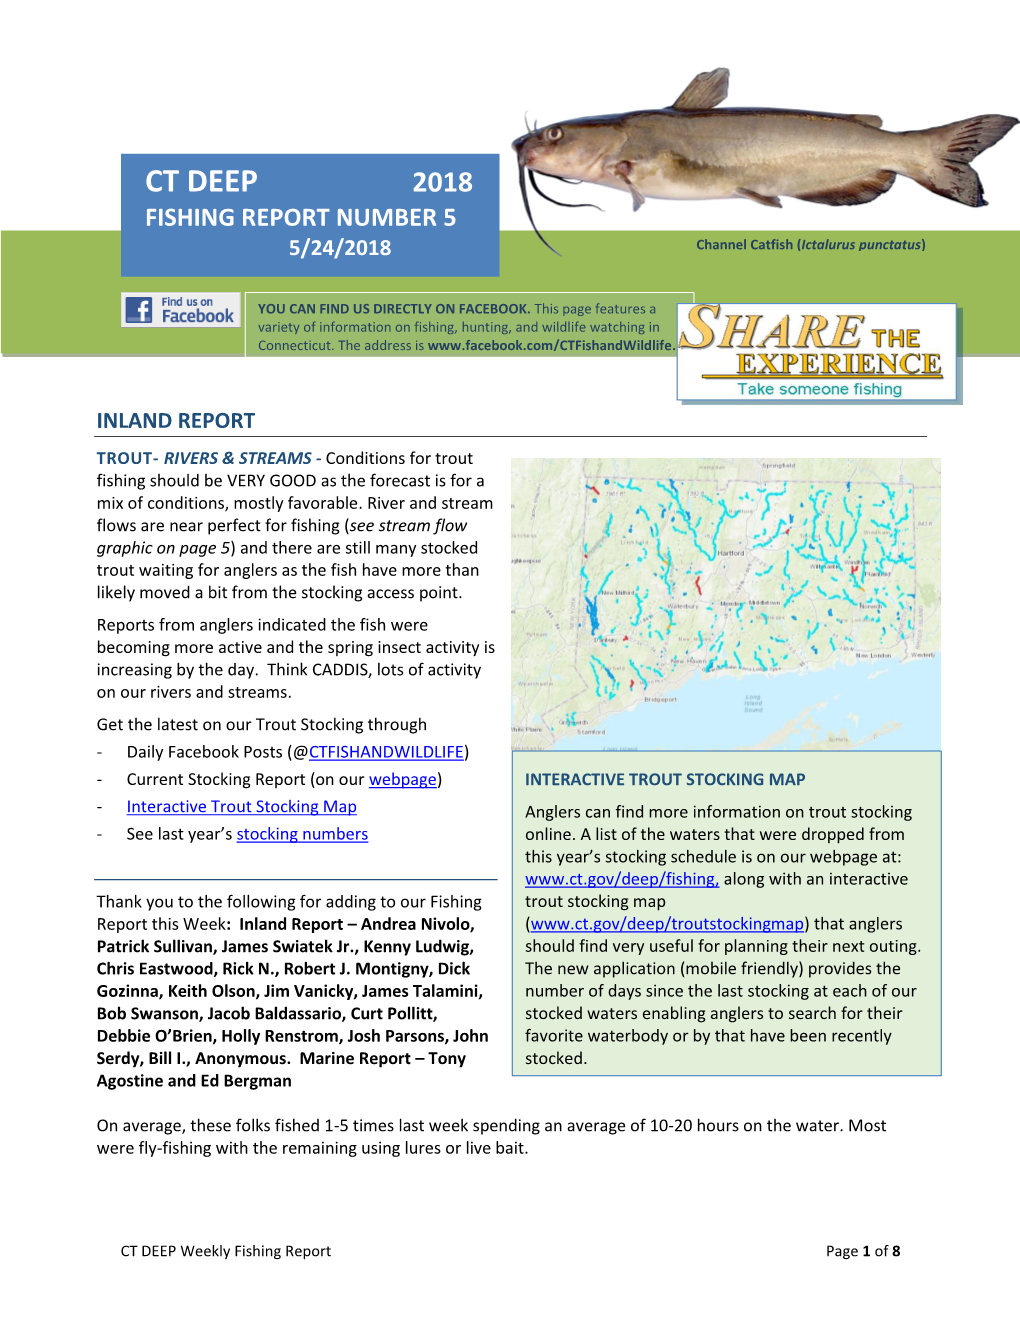 CT DEEP 2018 FISHING REPORT NUMBER 5 Channel Catfish (Ictalurus Punctatus) 5/24/2018 Channel Catfish (Ictalurus Punctatus)